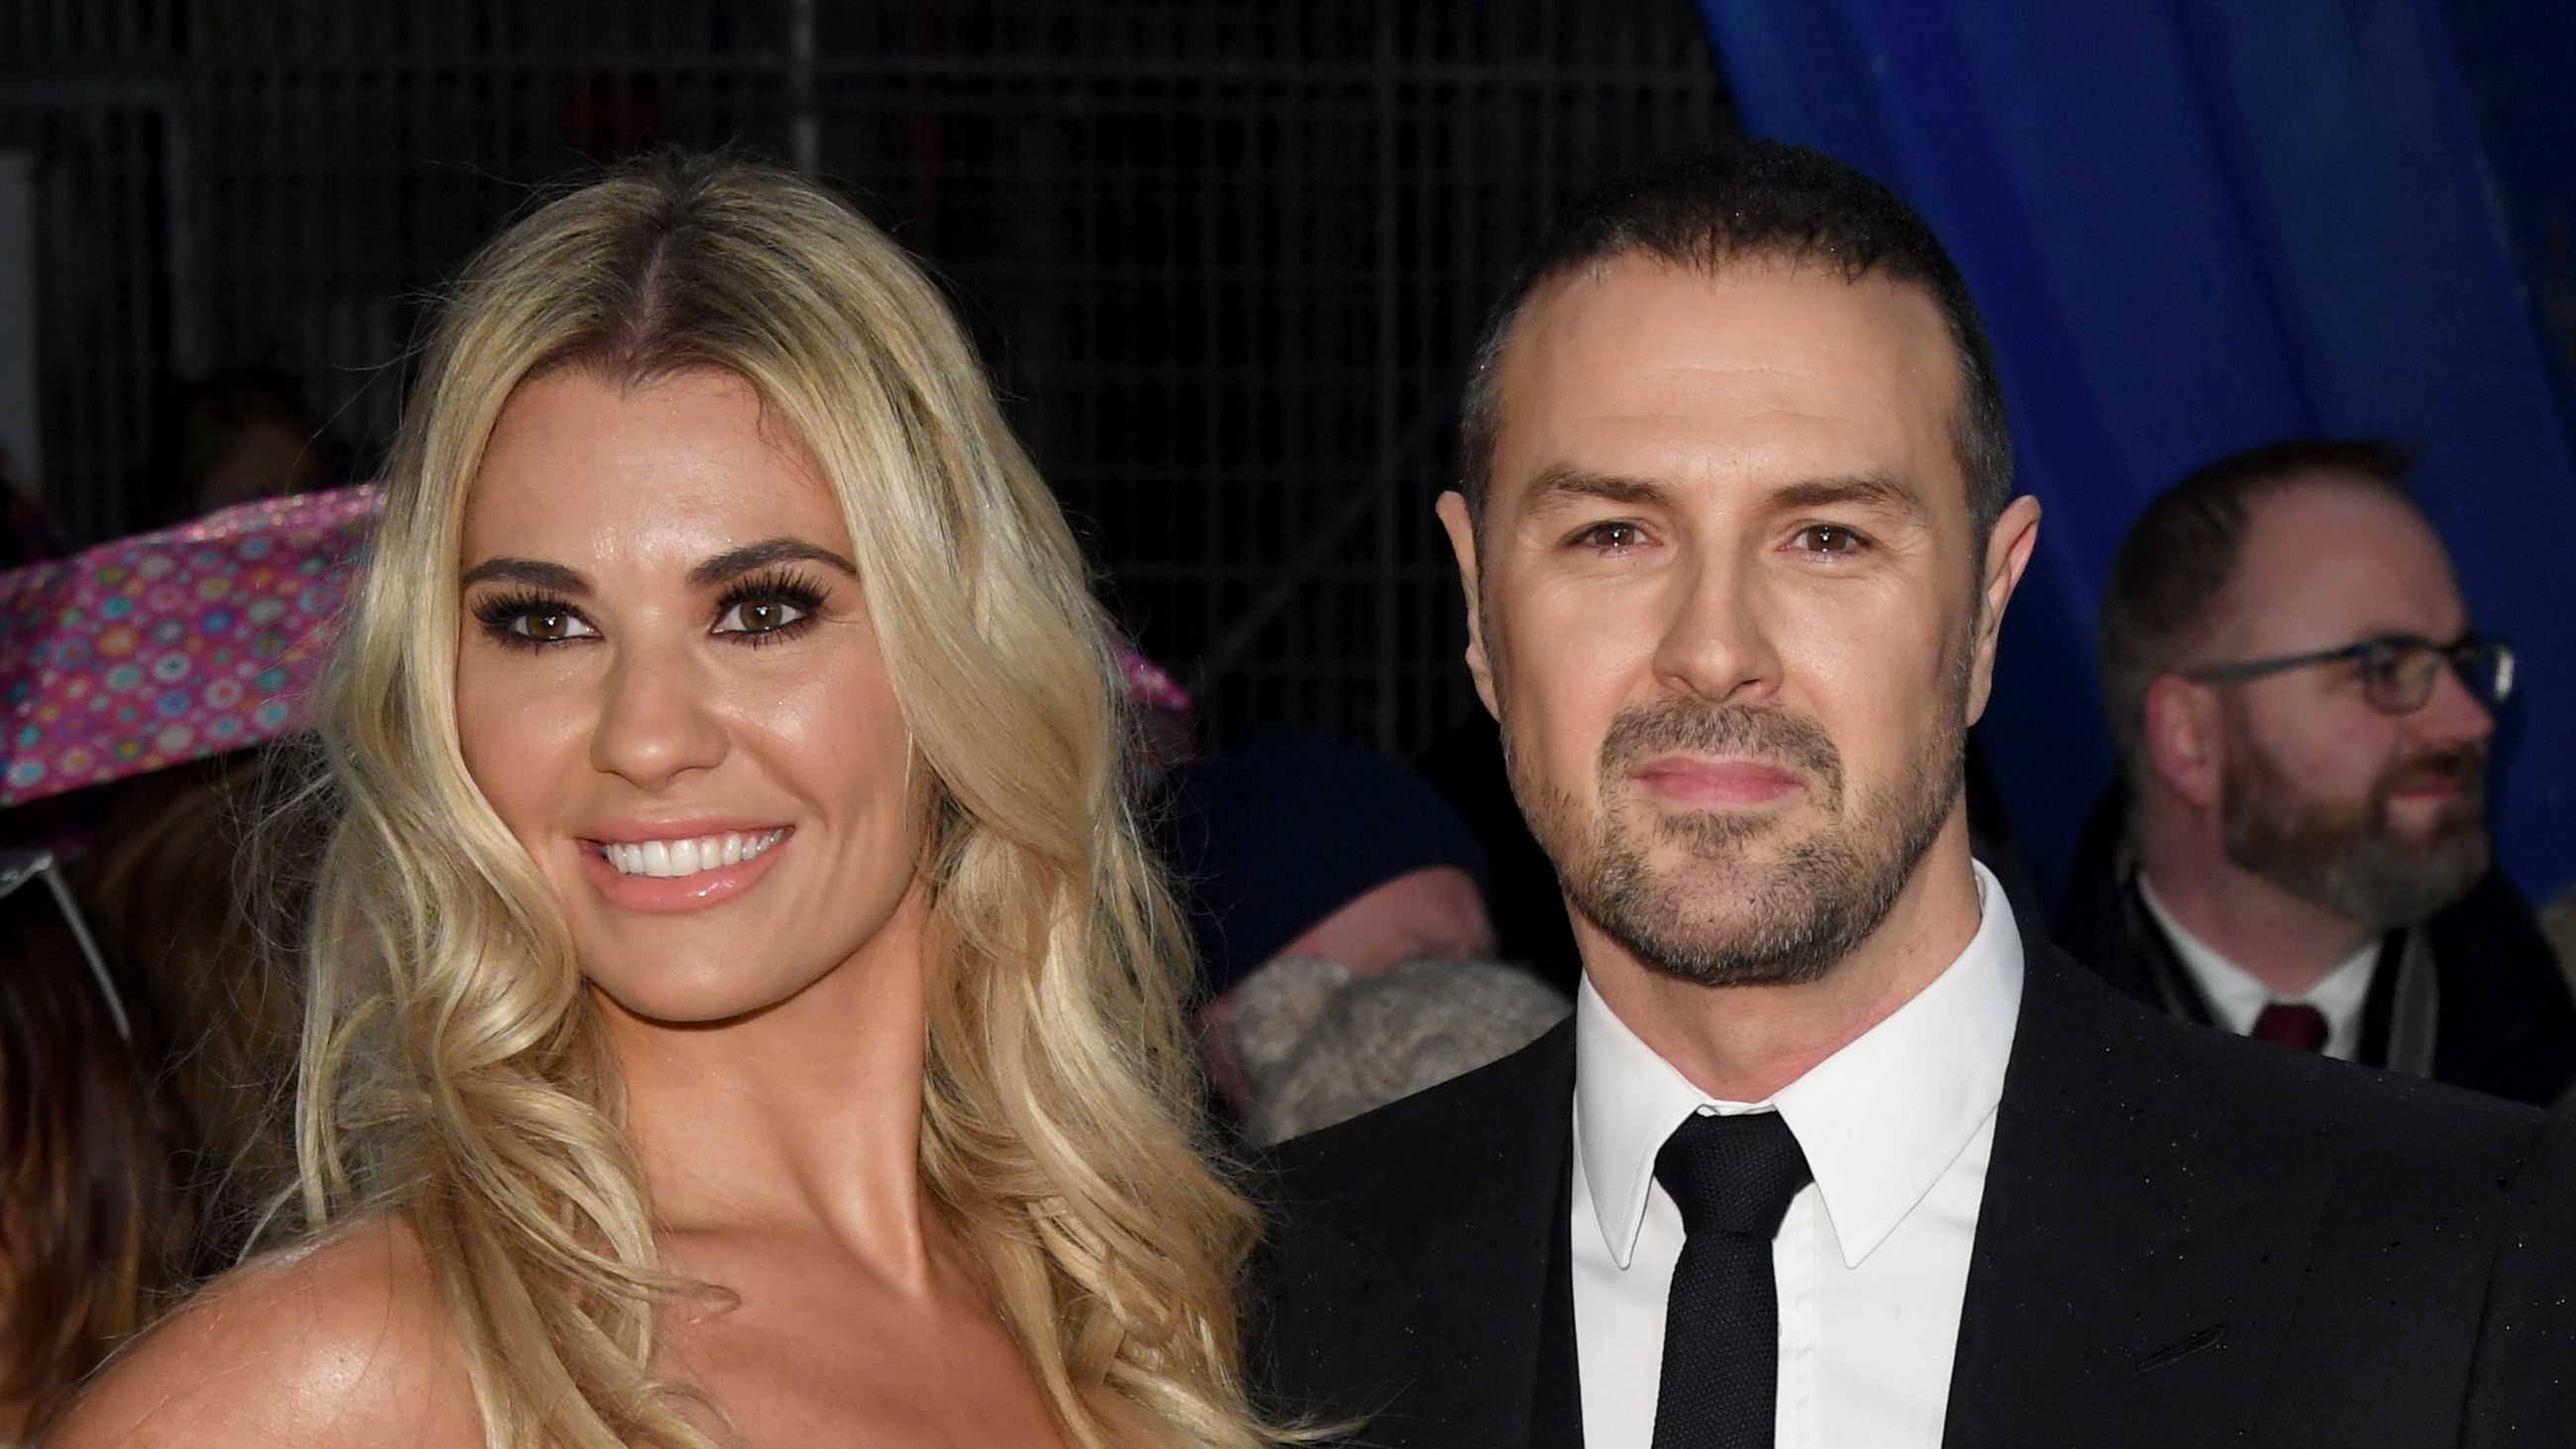 Christine McGuinness: Who is Paddy McGuinness' wife?